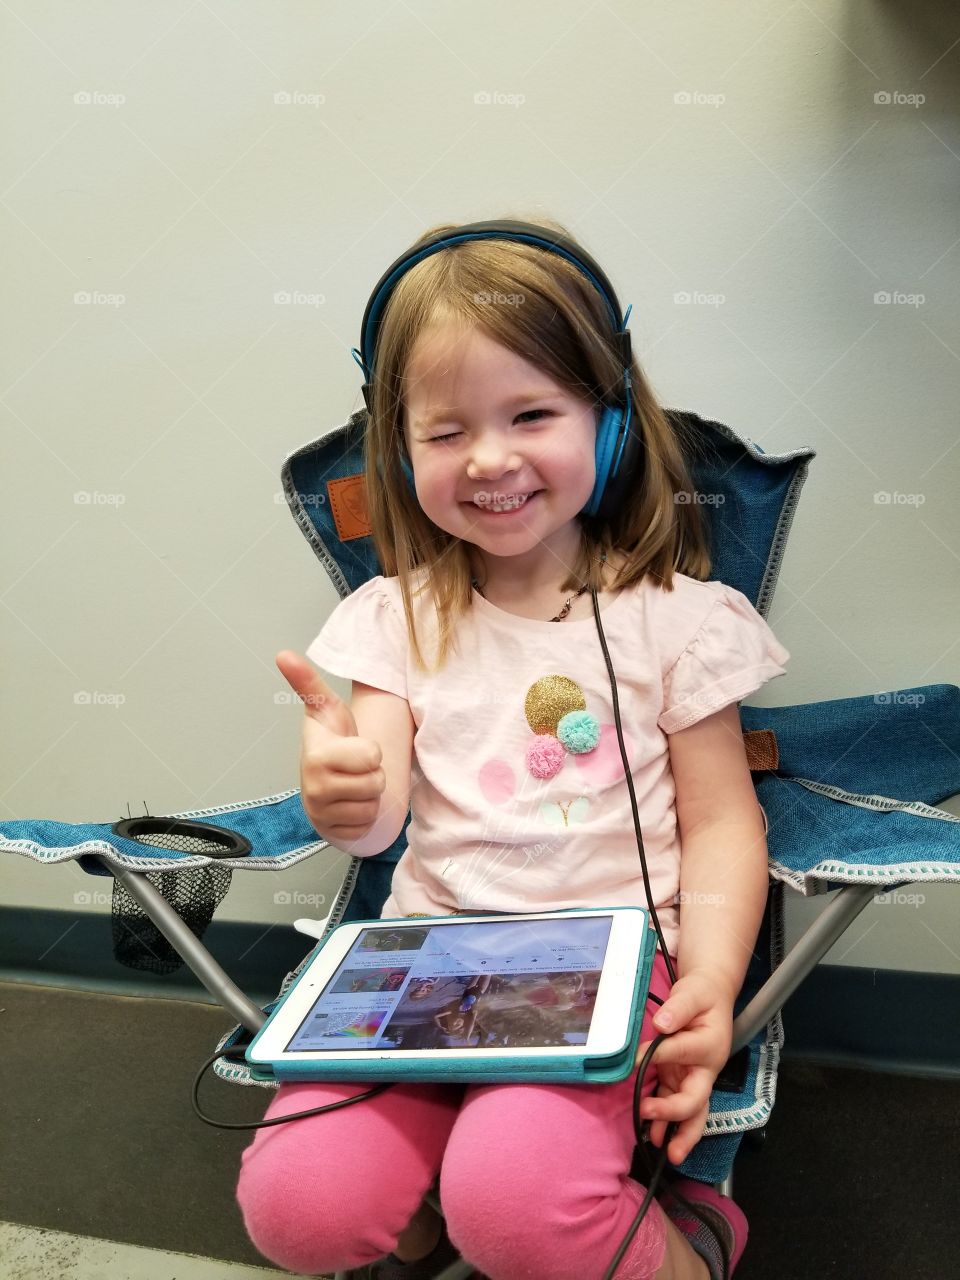 smiley little four year old girl giving thumbs up while on her ipad with headphones on